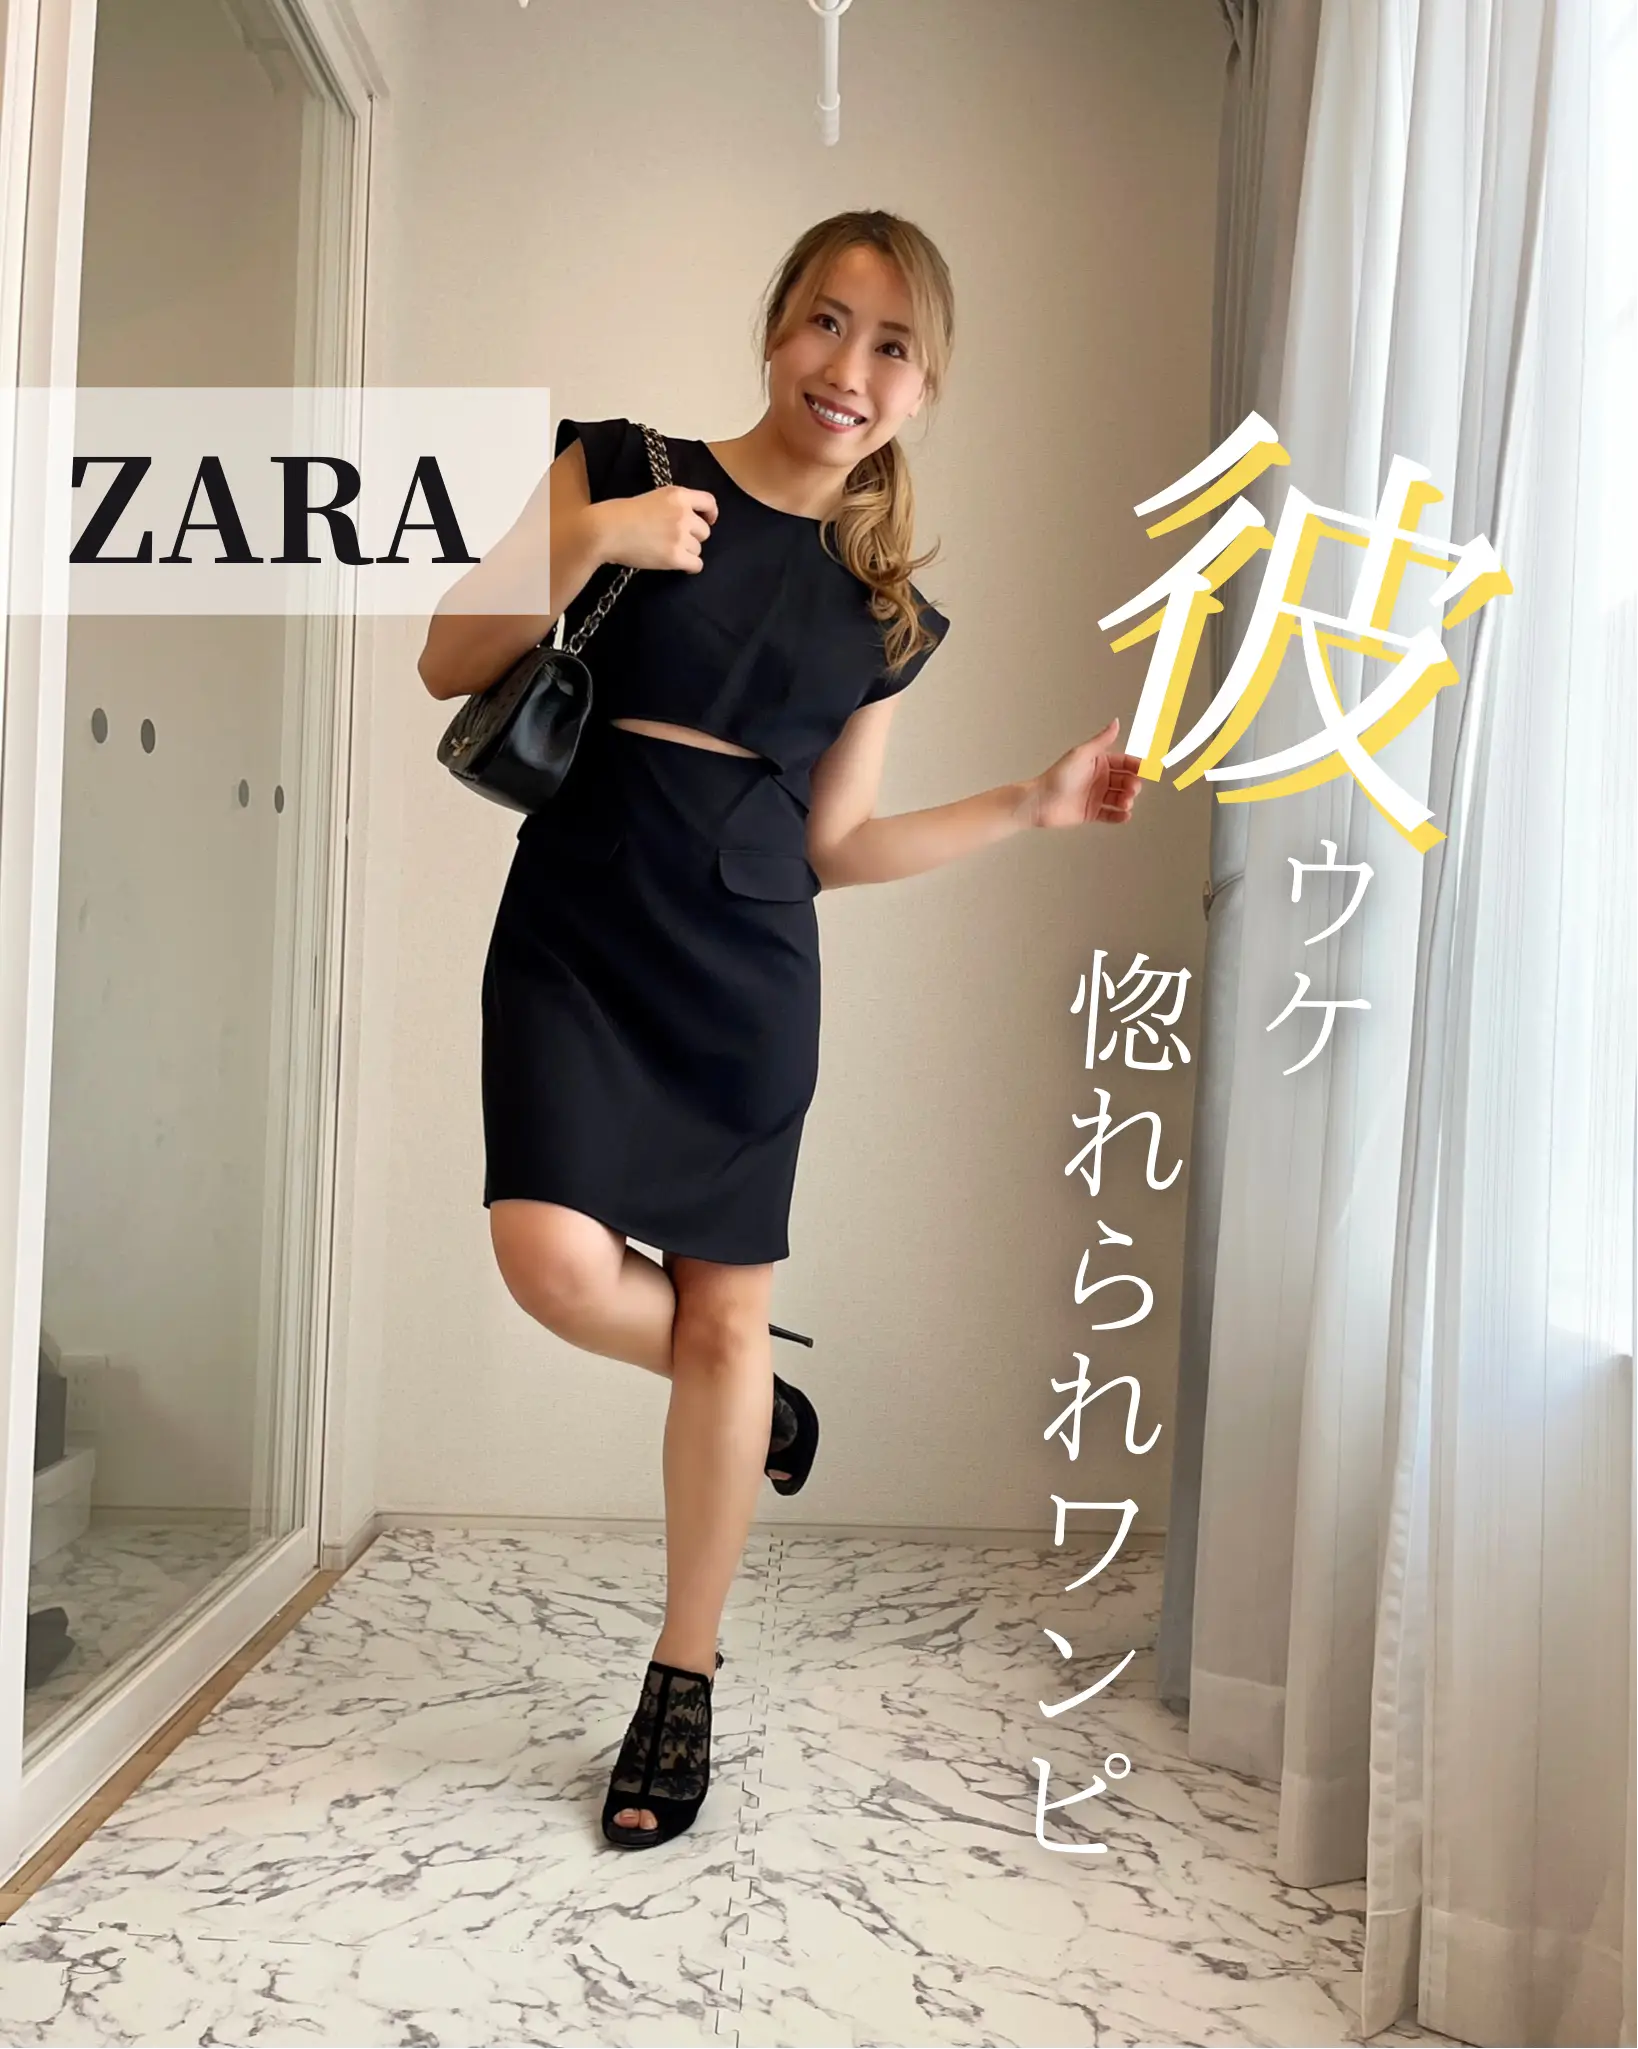 Zara's Spring 2022 Collection Is Full Of Top Trends